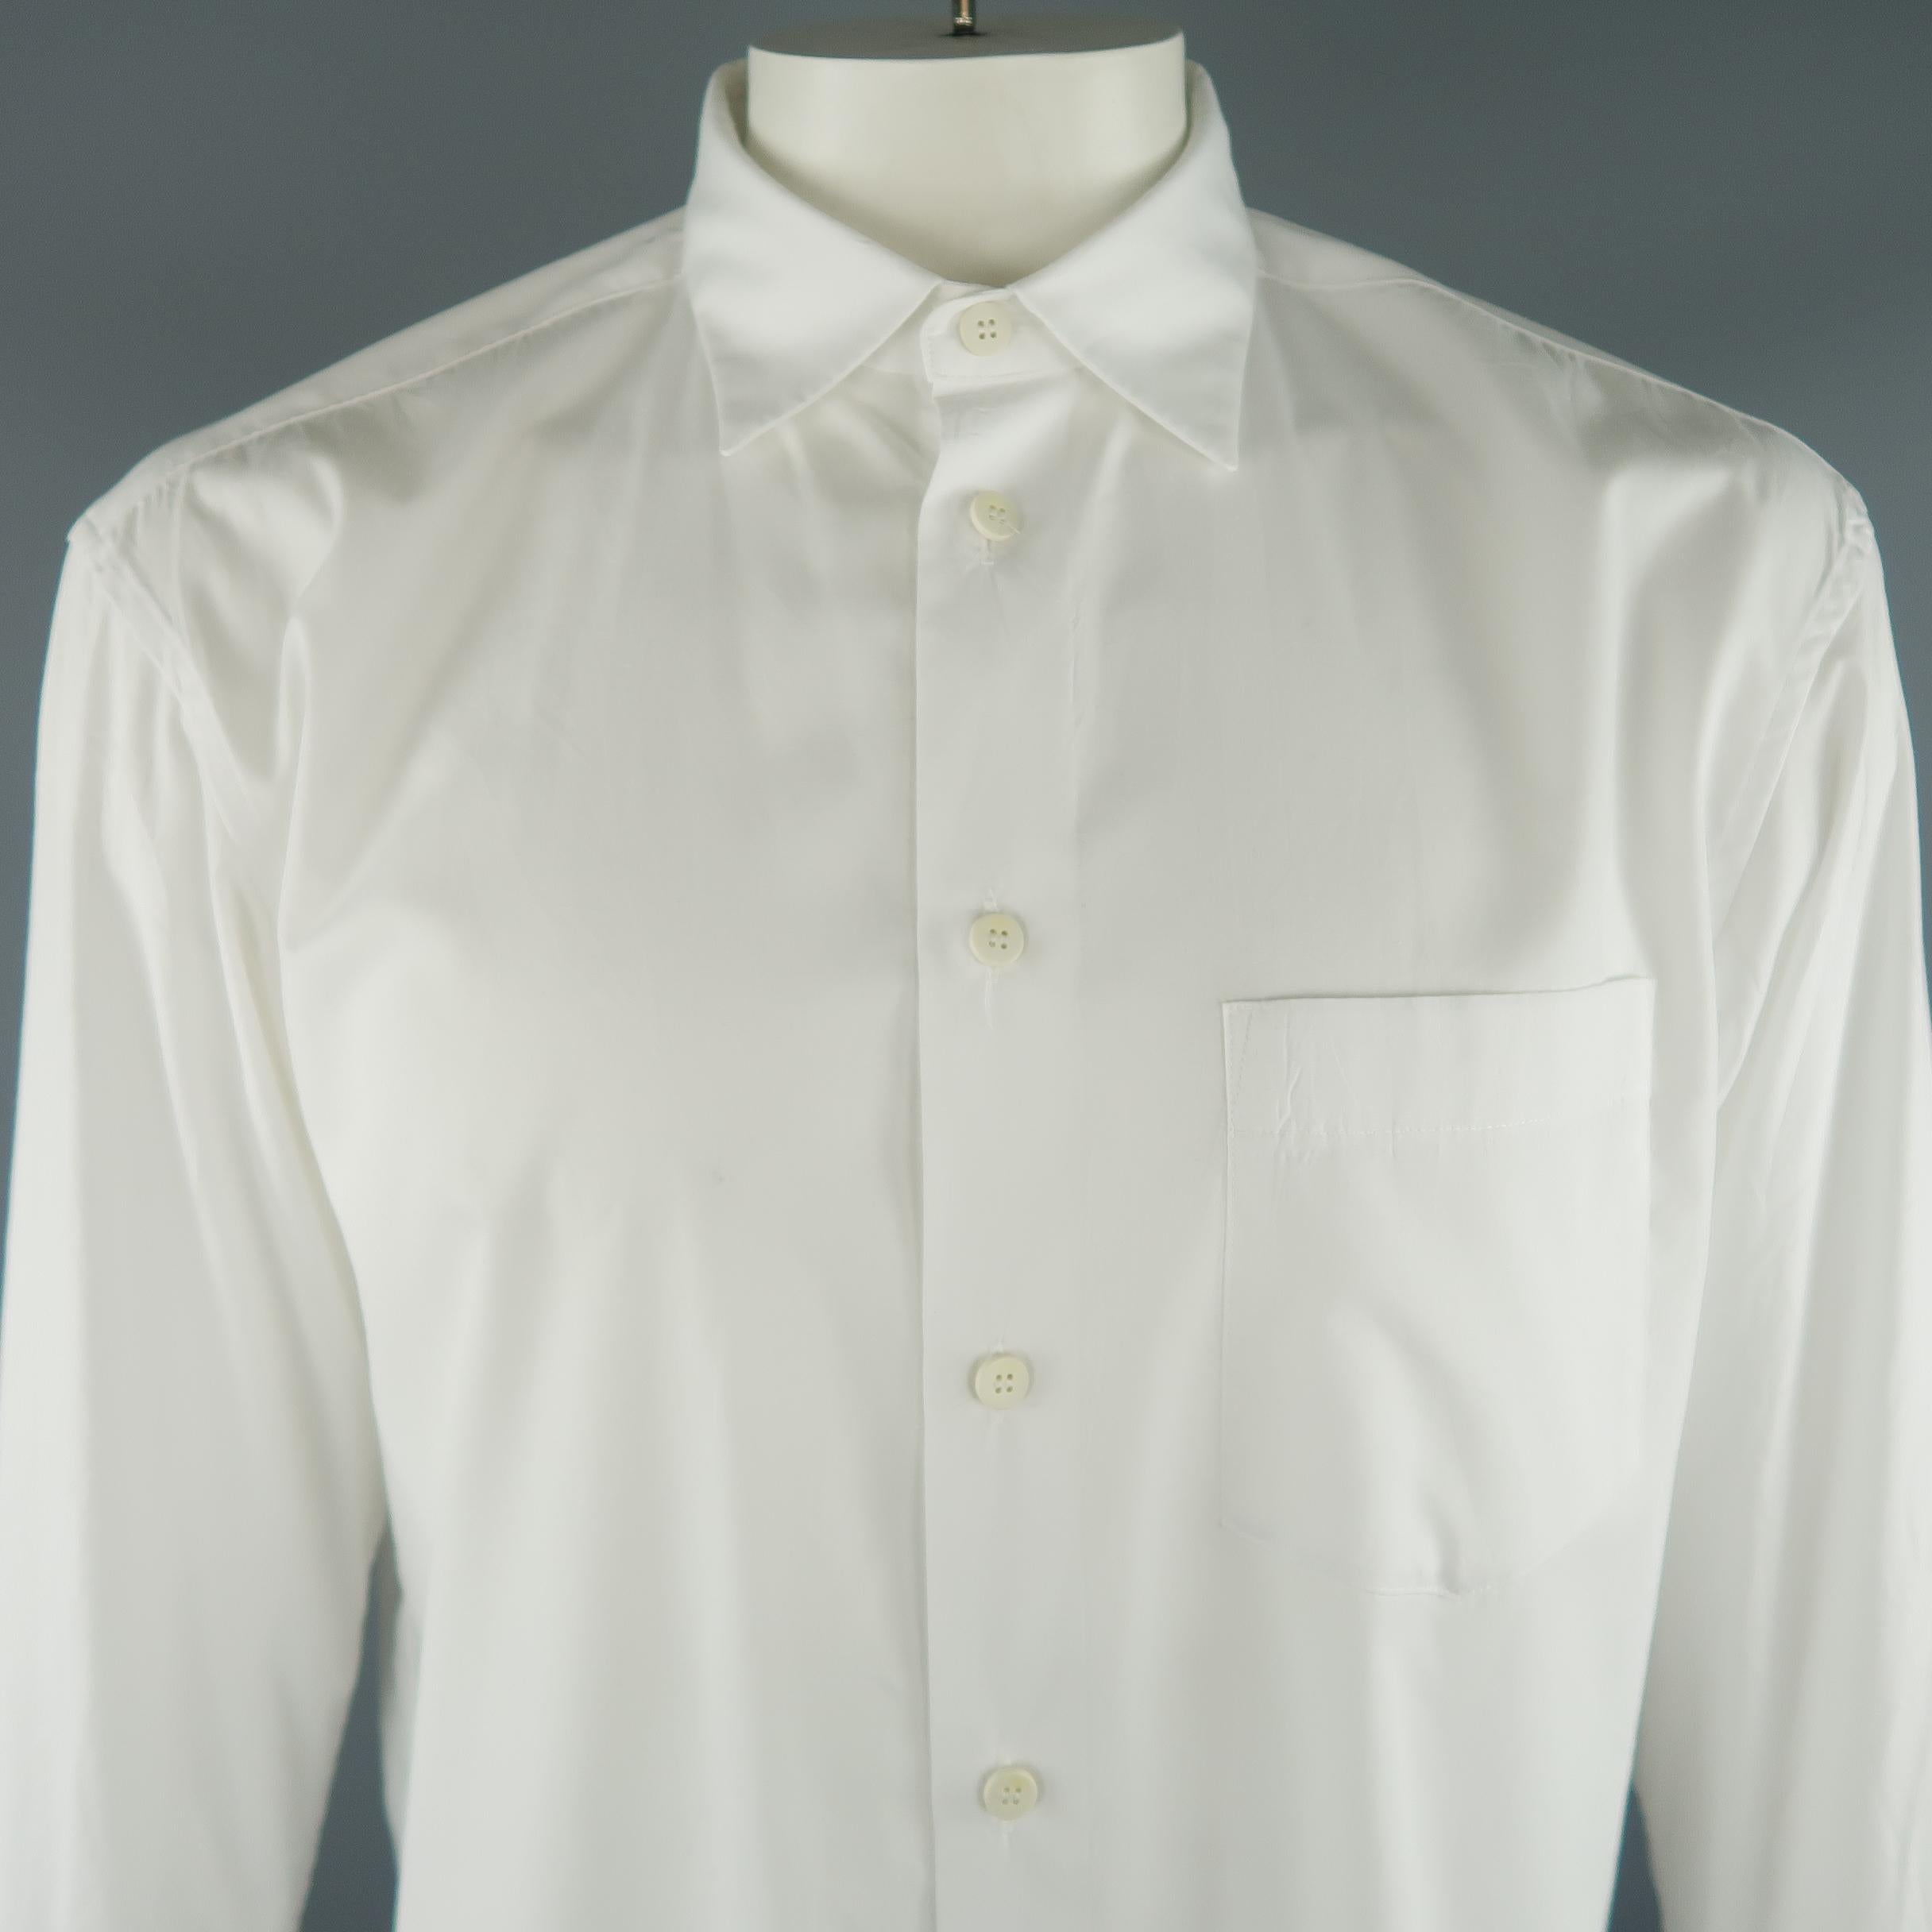 ISSEY MIYAKE long sleeve shirt comes in white tone in polyester / cotton material, with a front pocket, button up. Made in Japan.
 
Excellent Pre-Owned Condition.
Marked: 4 JP
 
Measurements:
 
Shoulder: 20  in.
Chest: 49 in.
Sleeve: 25 in.
Length: